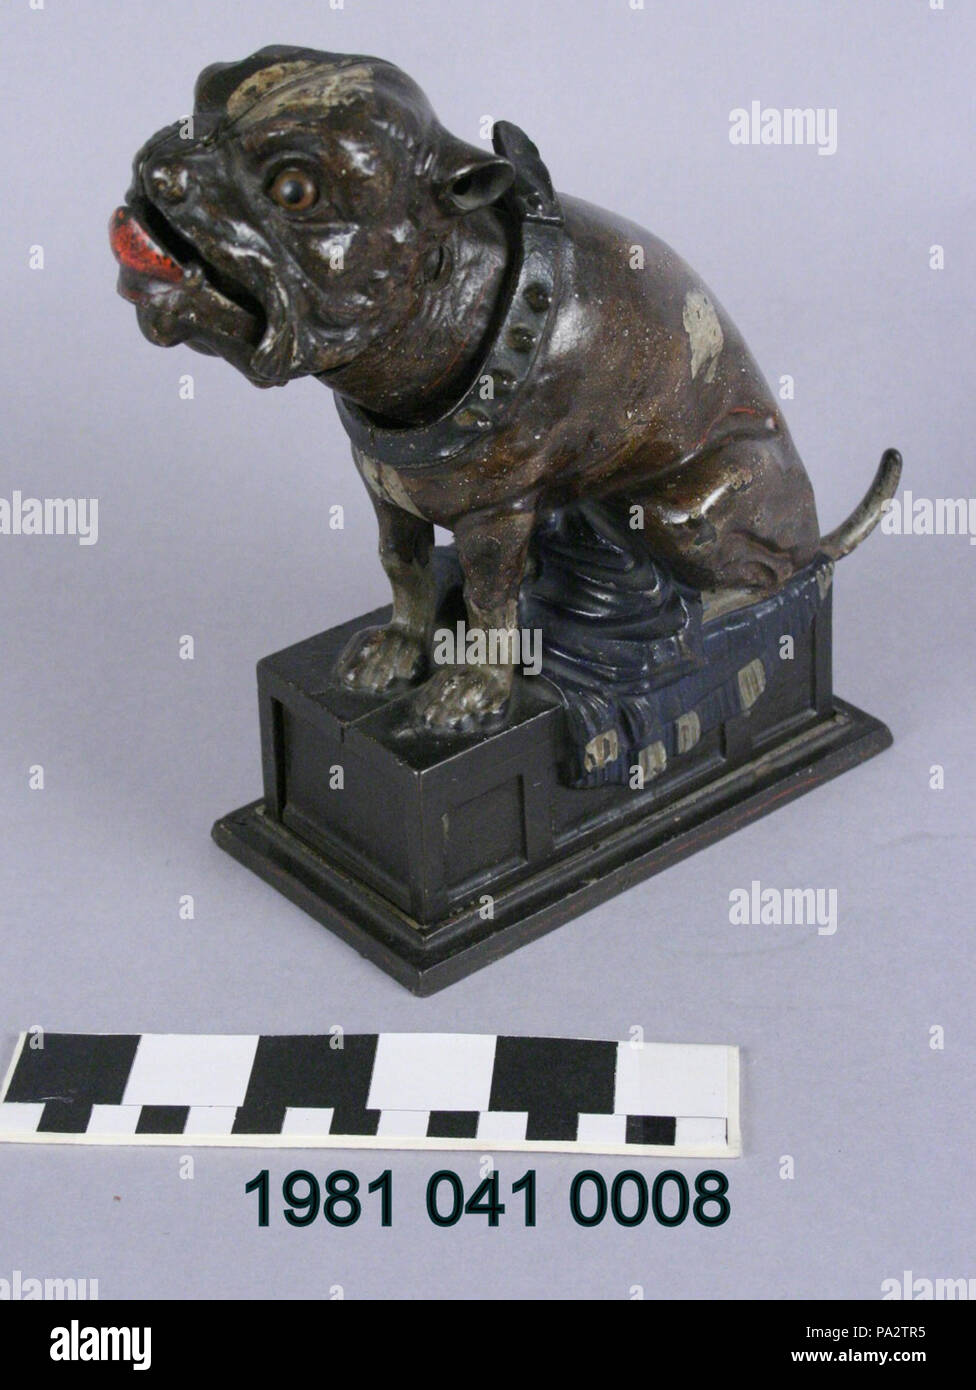 . English: Cast iron mechanical bank in the shape of a bull dog on top of a rectangular base. To make a deposit, a coin is placed on the dog's nose; pulling the dog's tail causes the dog to toss the coin off his nose and then catch it in his mouth, sending the coin to the reservoir below.Manufactured by the J and E Stevens Company circa 1880. Title: Bull Dog Mechanical Coin Bank . circa 1880 257 Bull Dog Mechanical Coin Bank Stock Photo